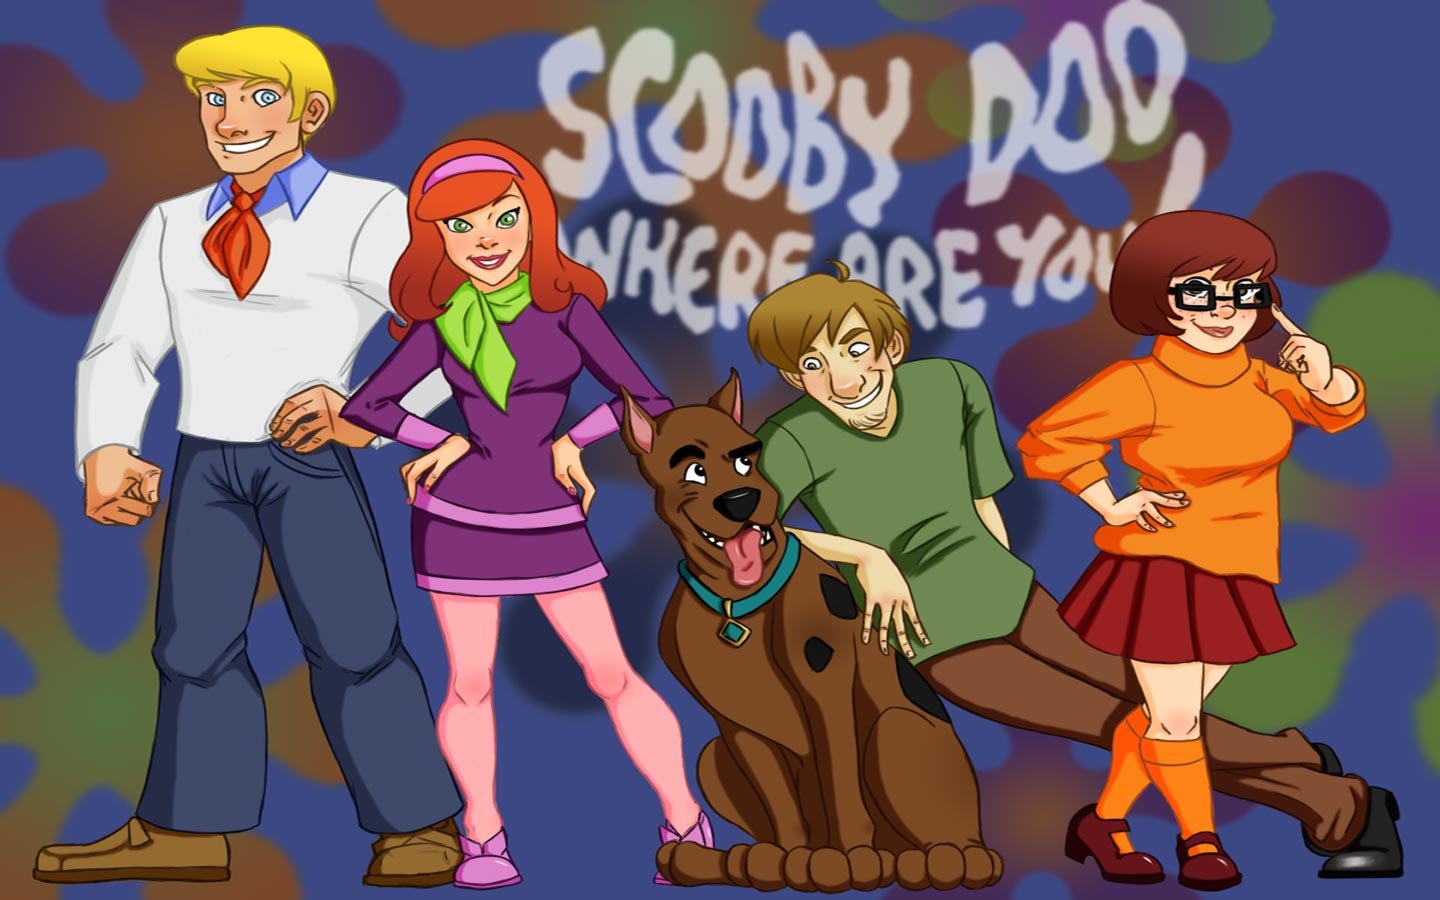 Awesome Scooby Doo free wallpaper ID:53300 for hd 1440x900 desktop